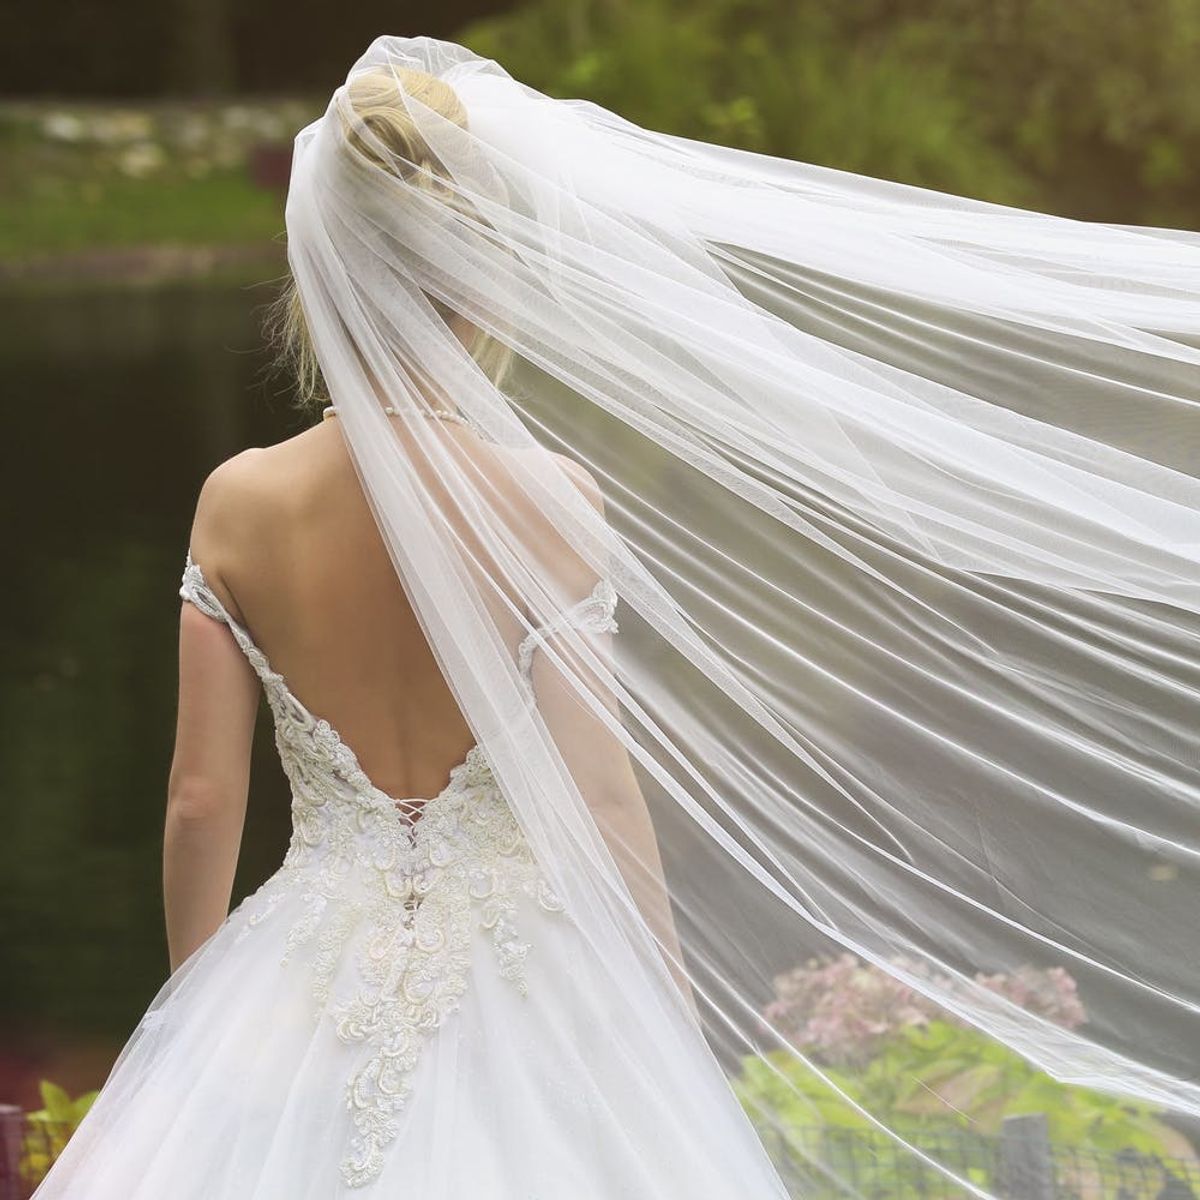 The Next Big Thing in Bridal Hair Accessories Is… Flying Veils?!